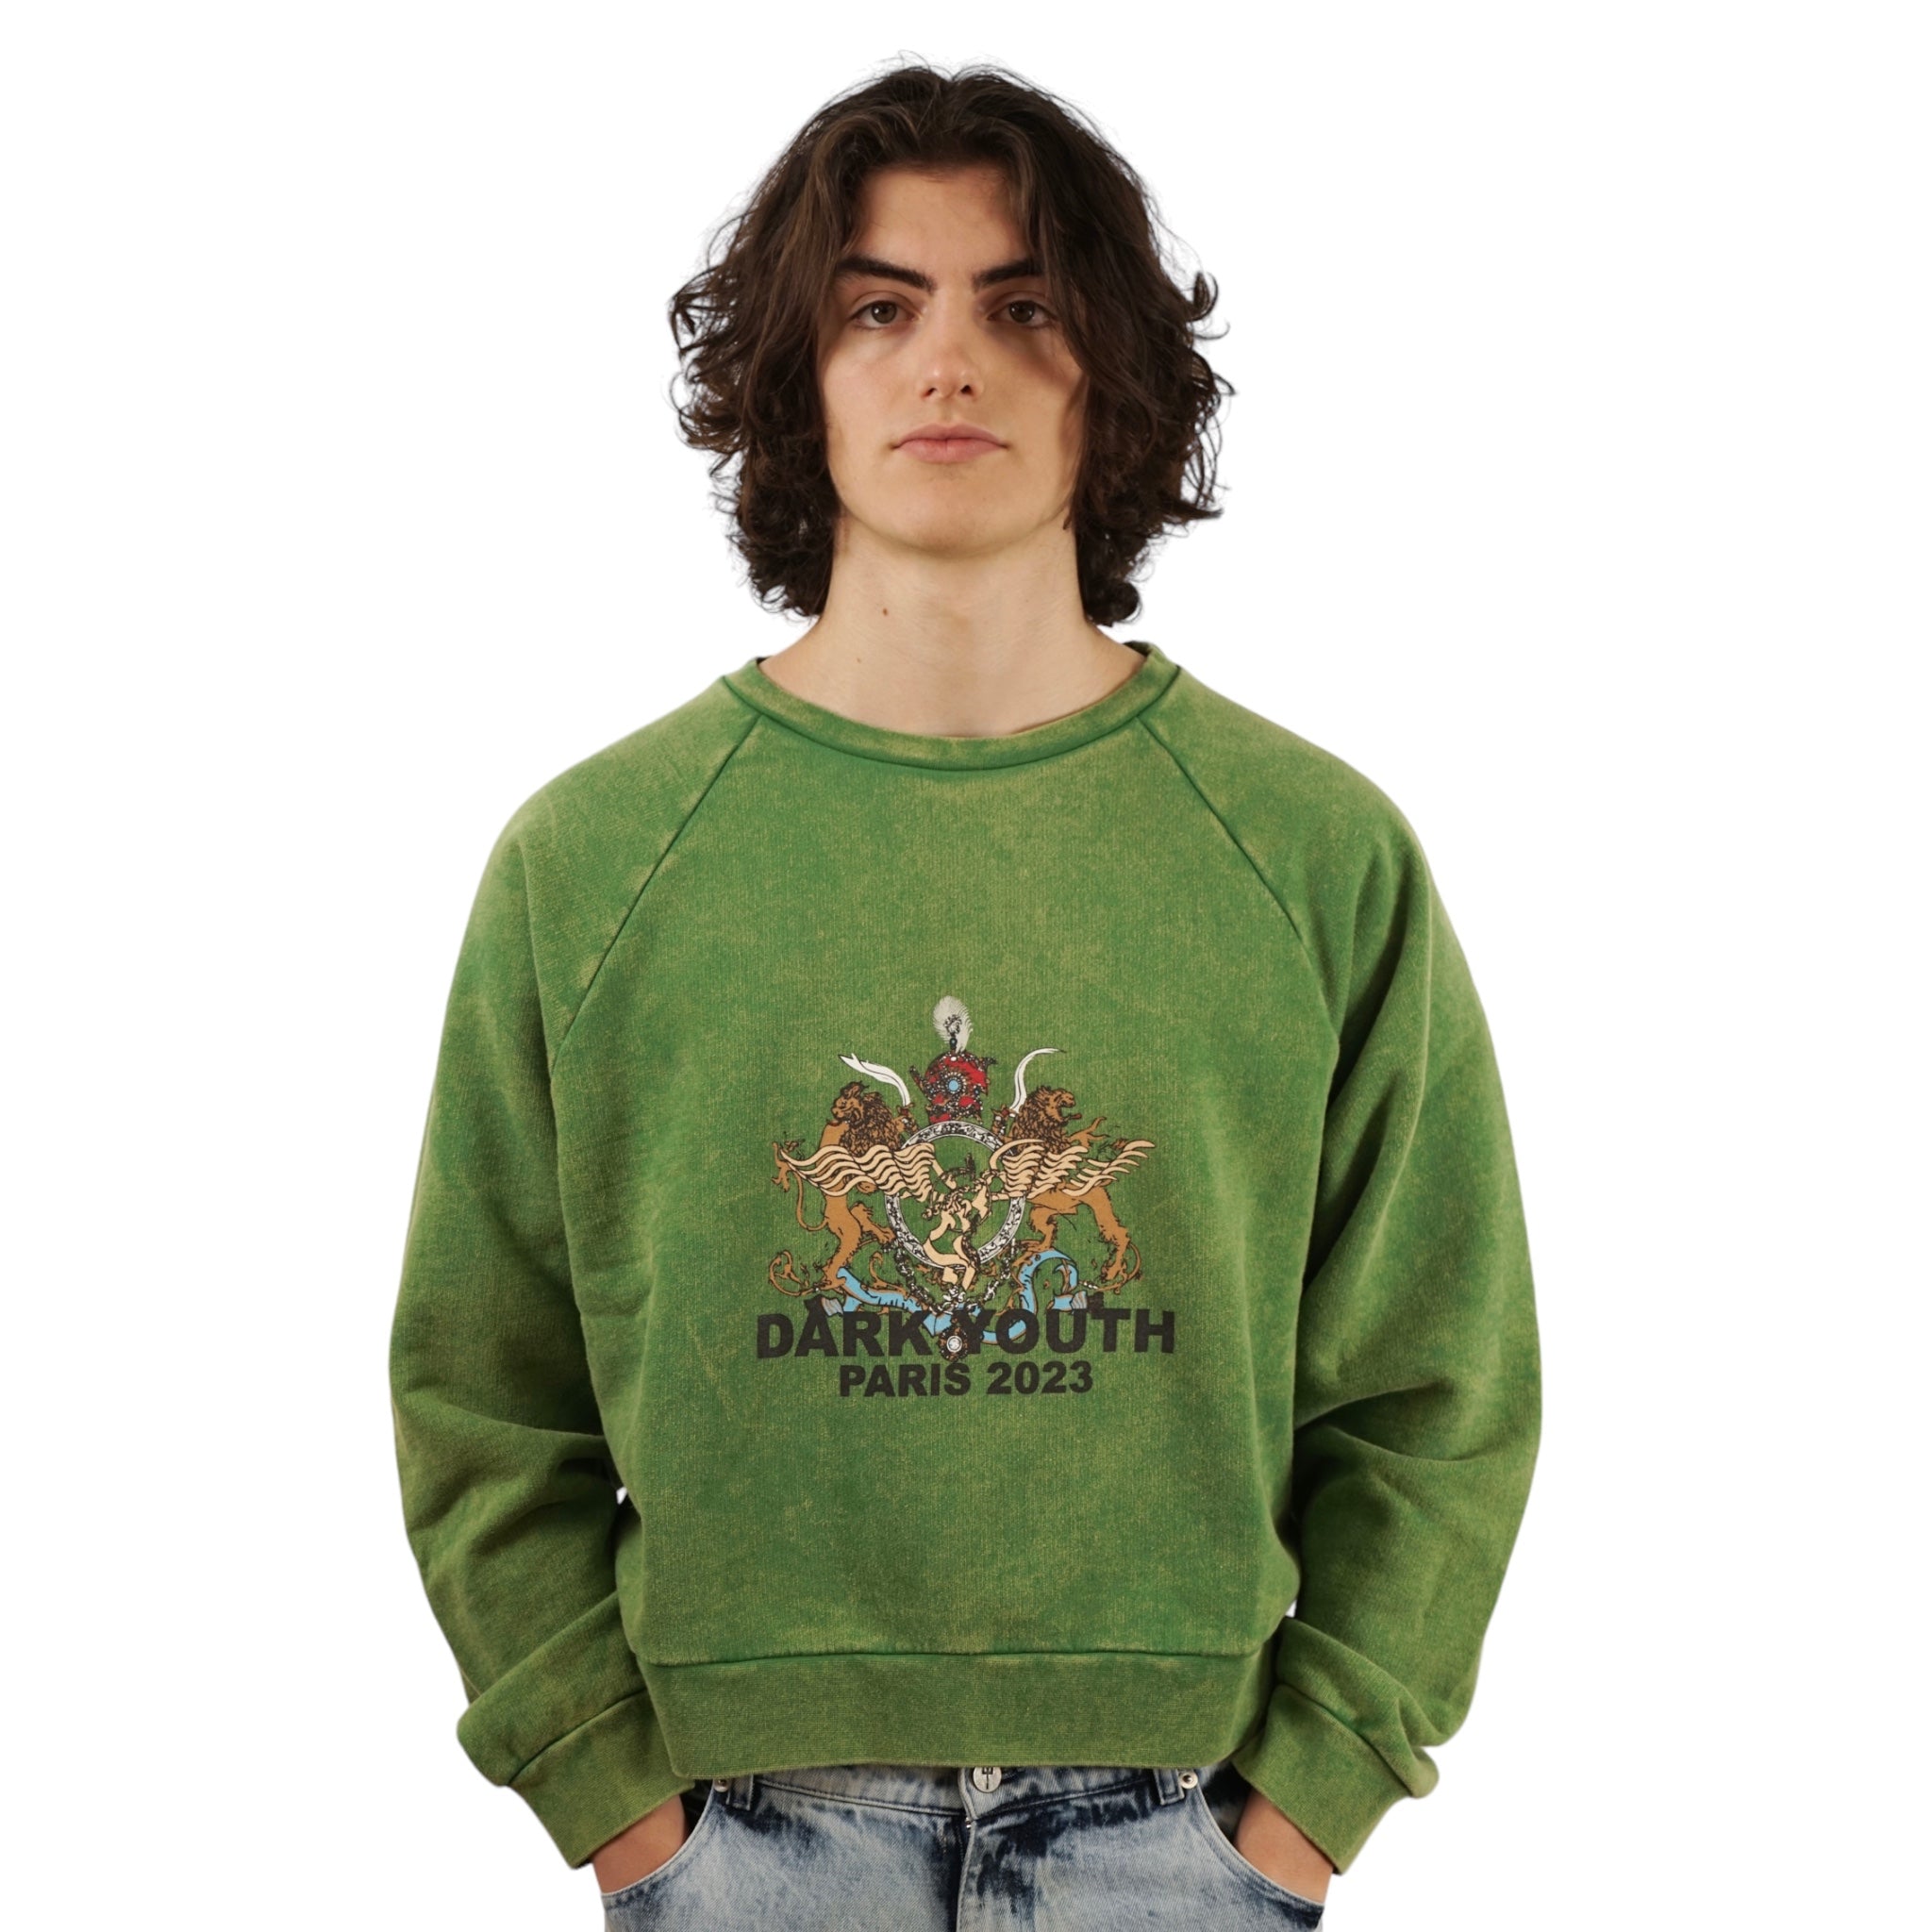 MEN SUNWASHED PRINTED SWEATSHIRT - KNIT - Liberal Youth Ministry